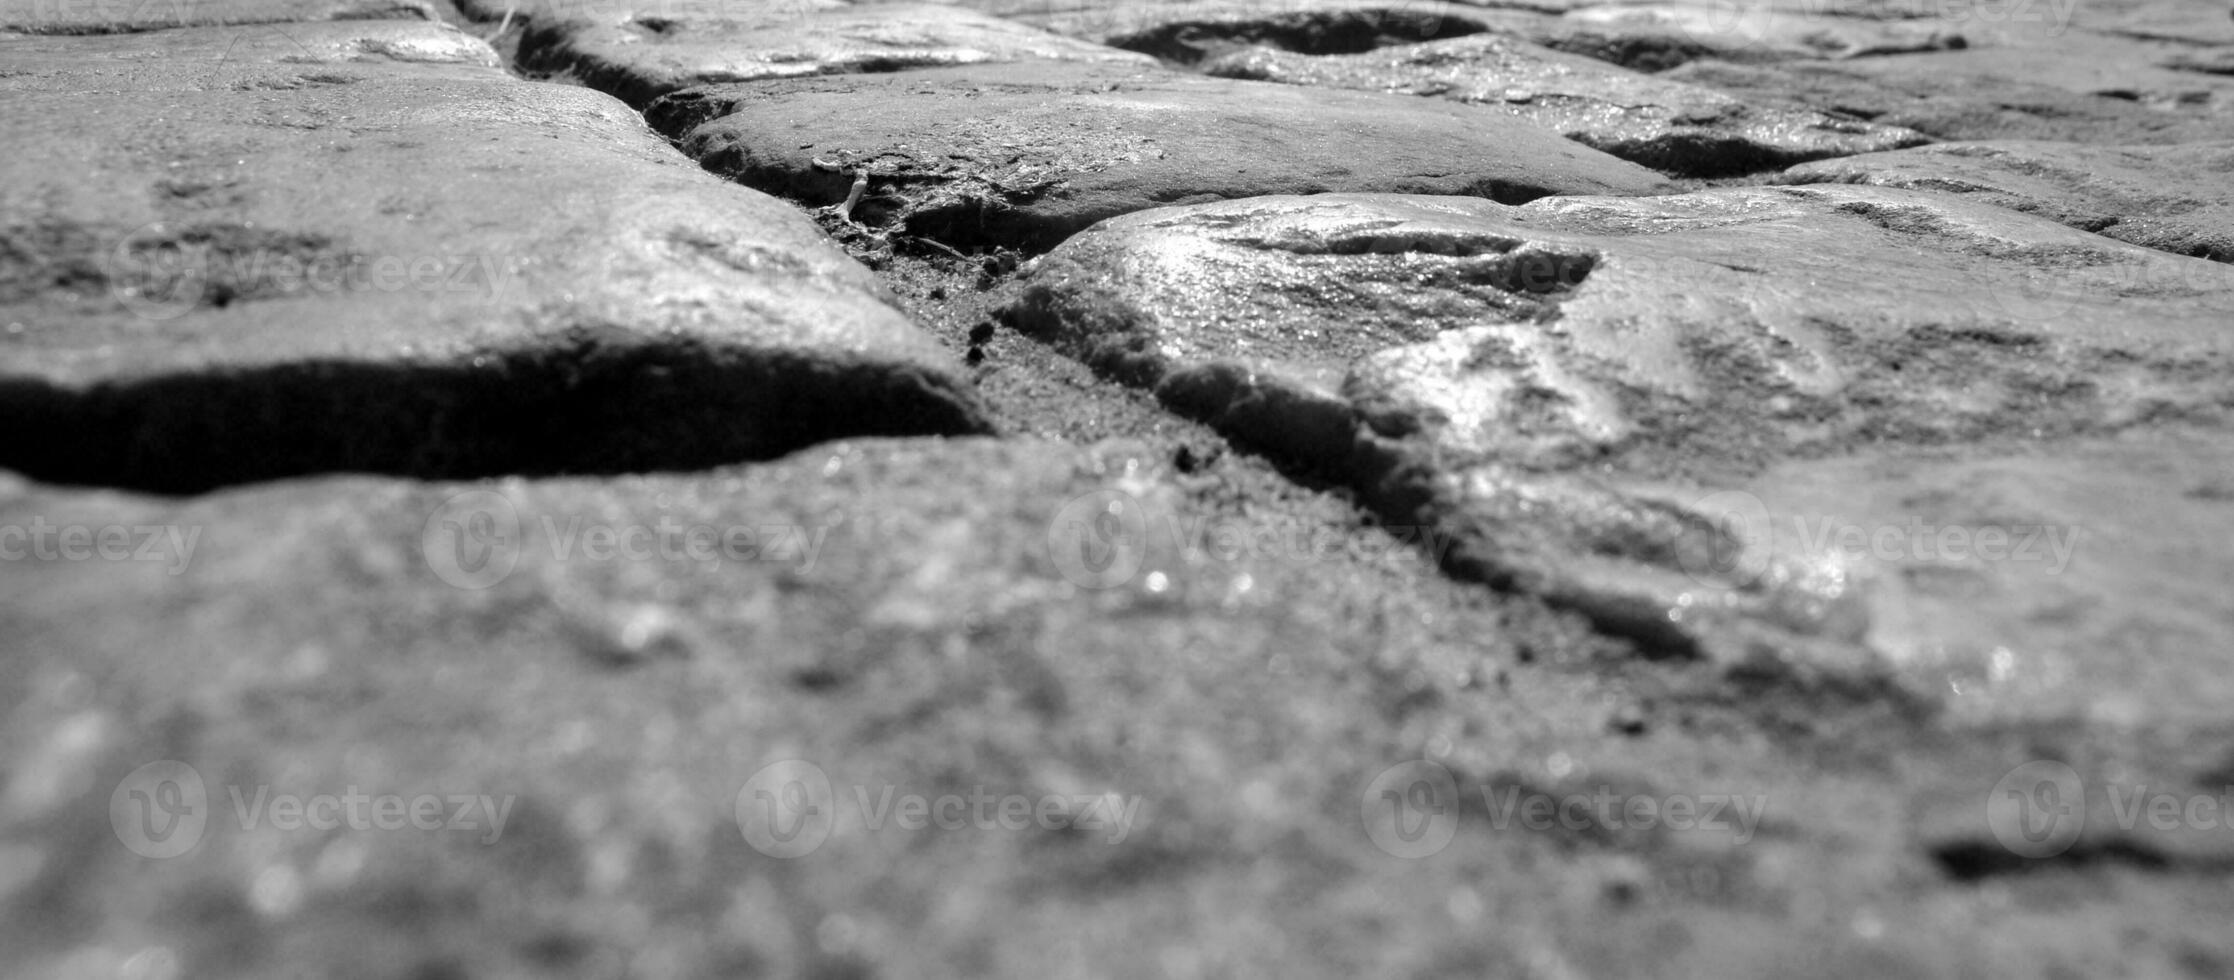 Road pavement made of stones, close view black and white background photo